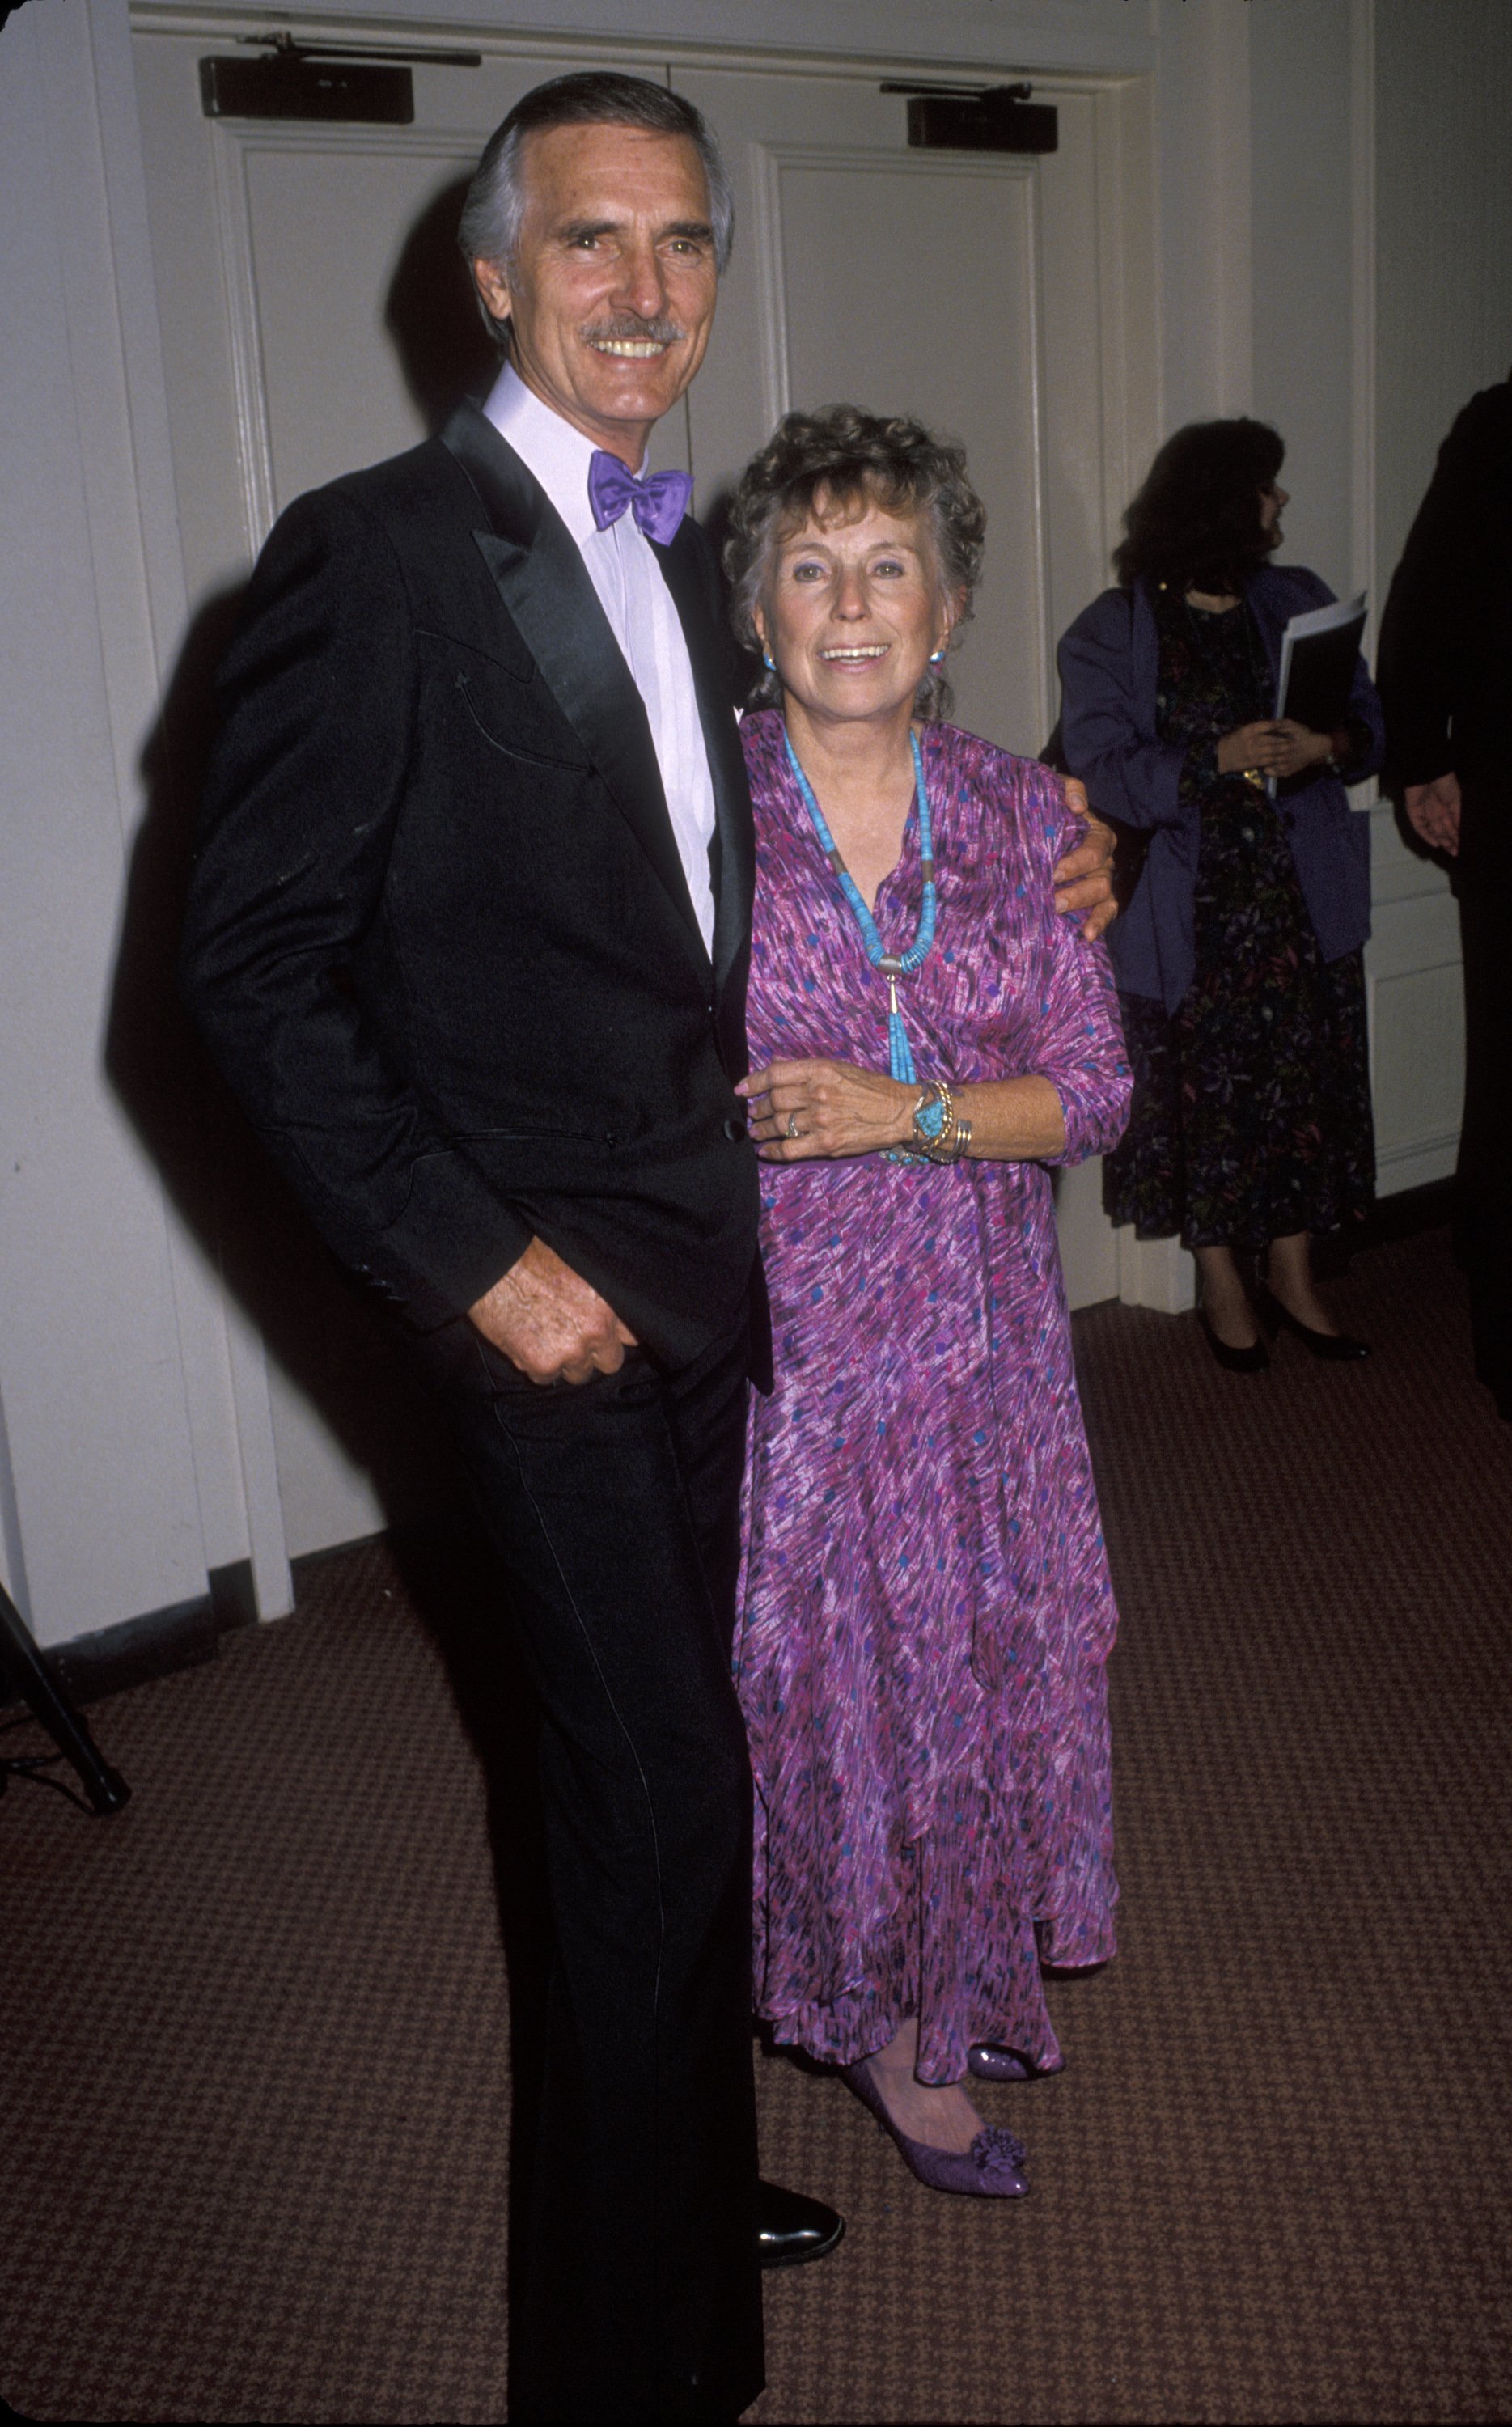 Dennis Weaver and wife Gerry Stowell during L.I.F.E. Benefit for Dennis Weaver at Century Plaza Hotel on October 12, 1990 in Century City, California. / Source: Getty Images